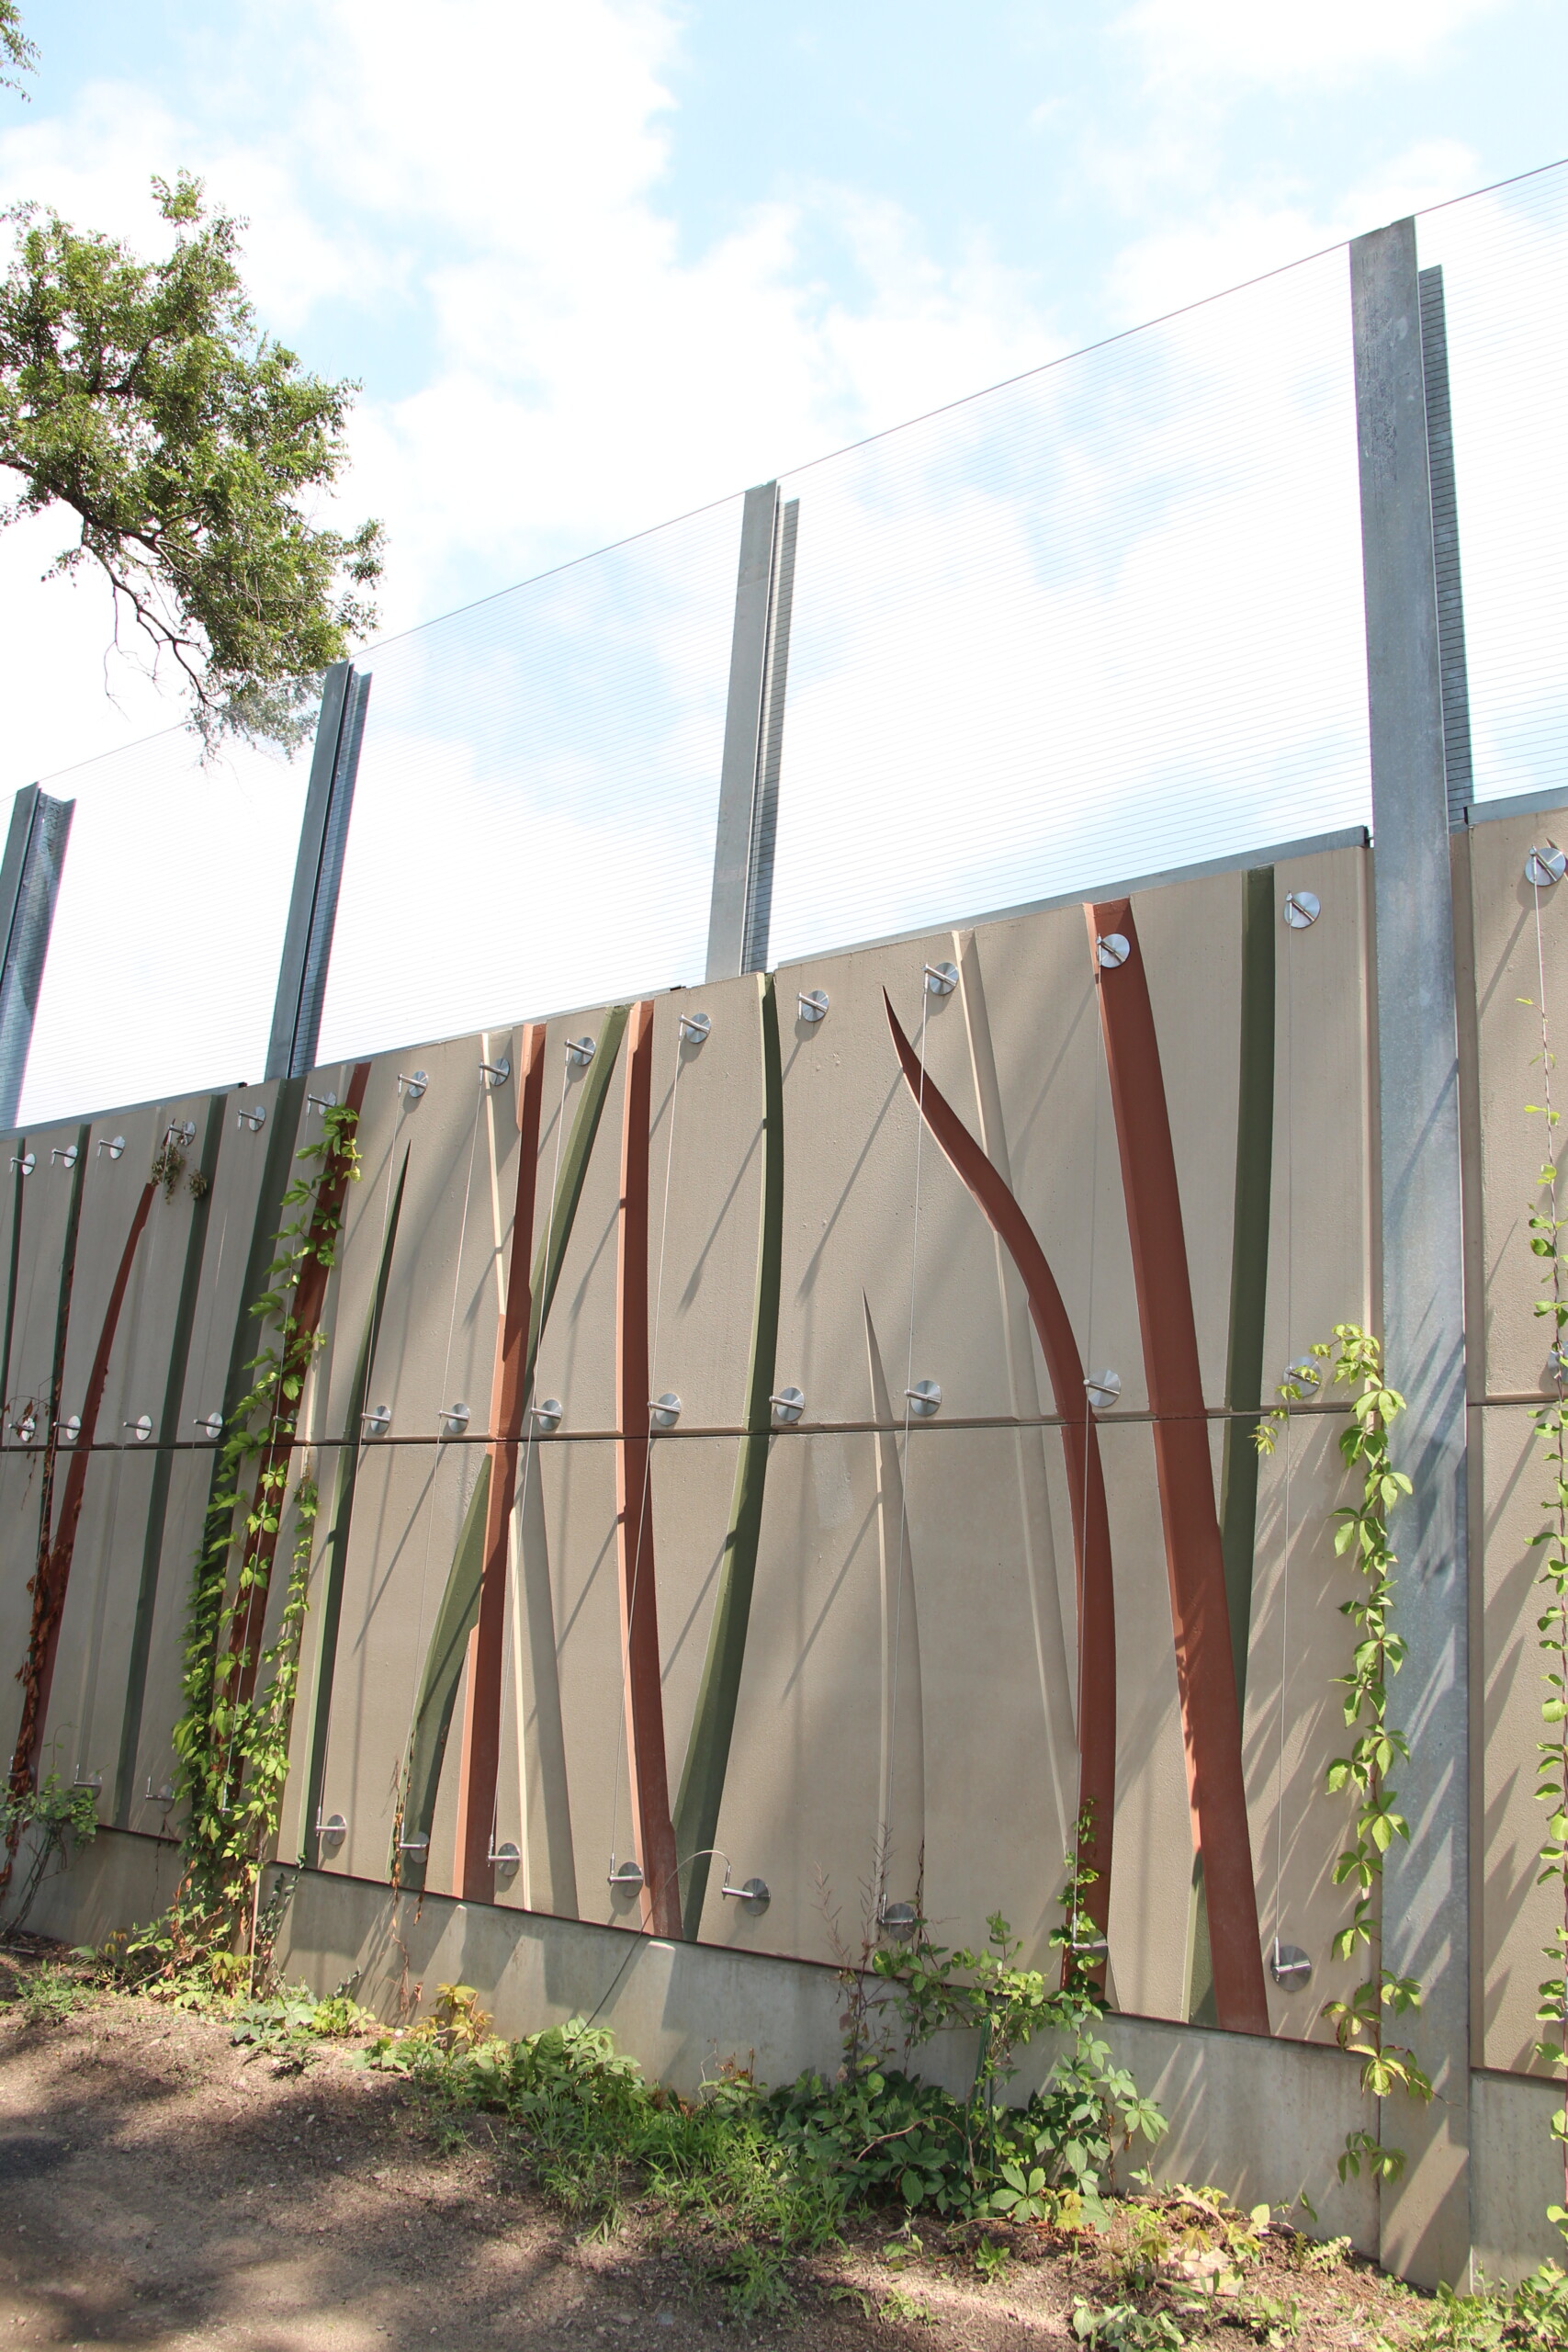 Noise barrier with Durisol absorptive panels featuring a custom "grasslands" pattern topped with Transparent Acrylite Soundstop sheets along Metrolinx's Union Pearson Express rail line in Toronto, ON.